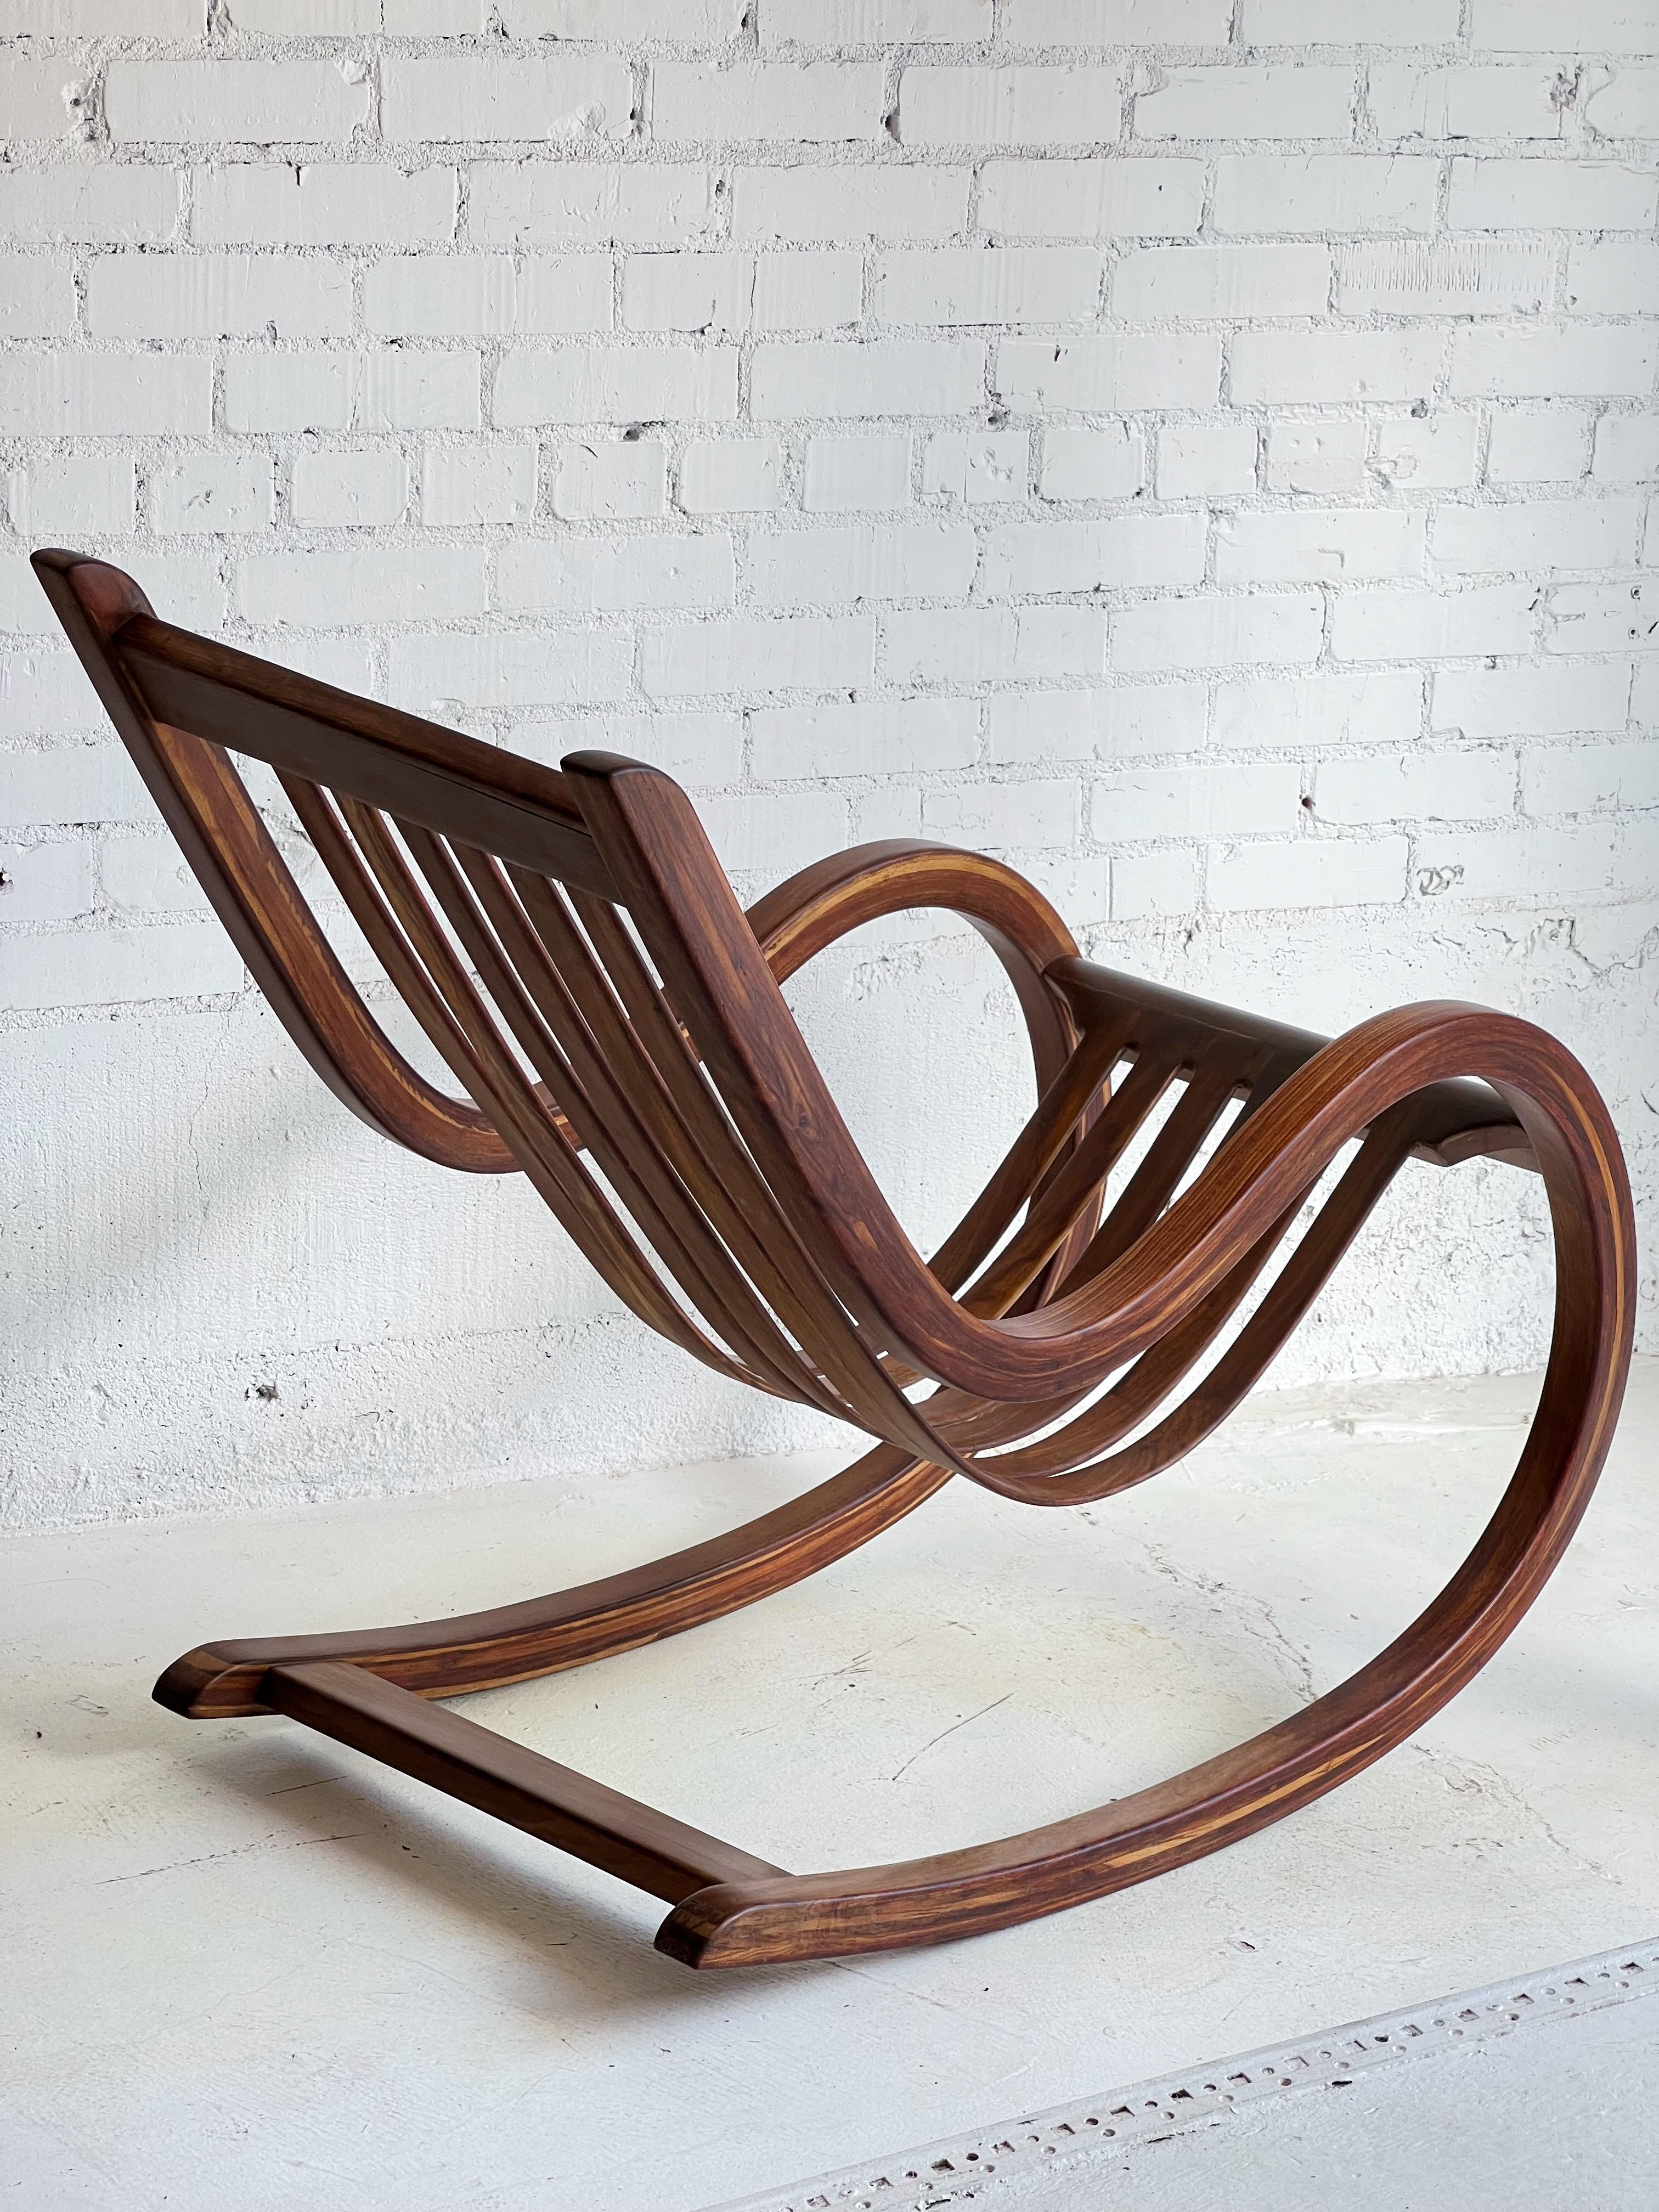 Che-Chent Rocking Chair designed by Salvador Vidal - Handmade in the designer's studio furniture maker in Cancun, Mexico. Made of Caribbean rosewood also known as Palo de Rosa tree, or Che-Chent to the locals, which was harvested in the jungle as a